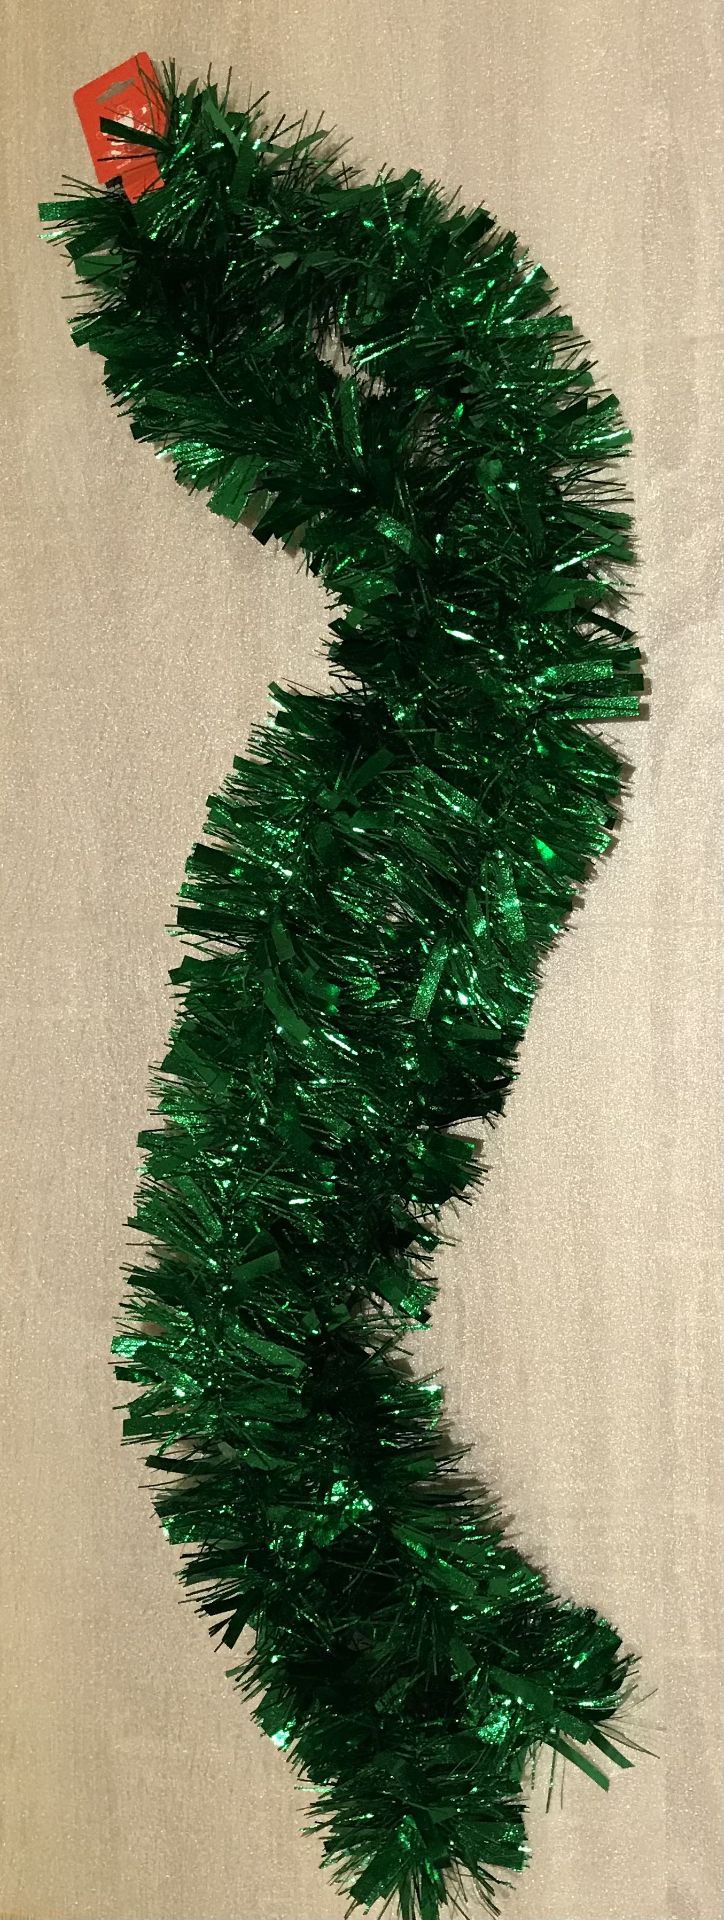 500 X Luxury Tinsel 1.8M 5 Colours Gold, Silver, Red, Blue, Green - Image 6 of 6